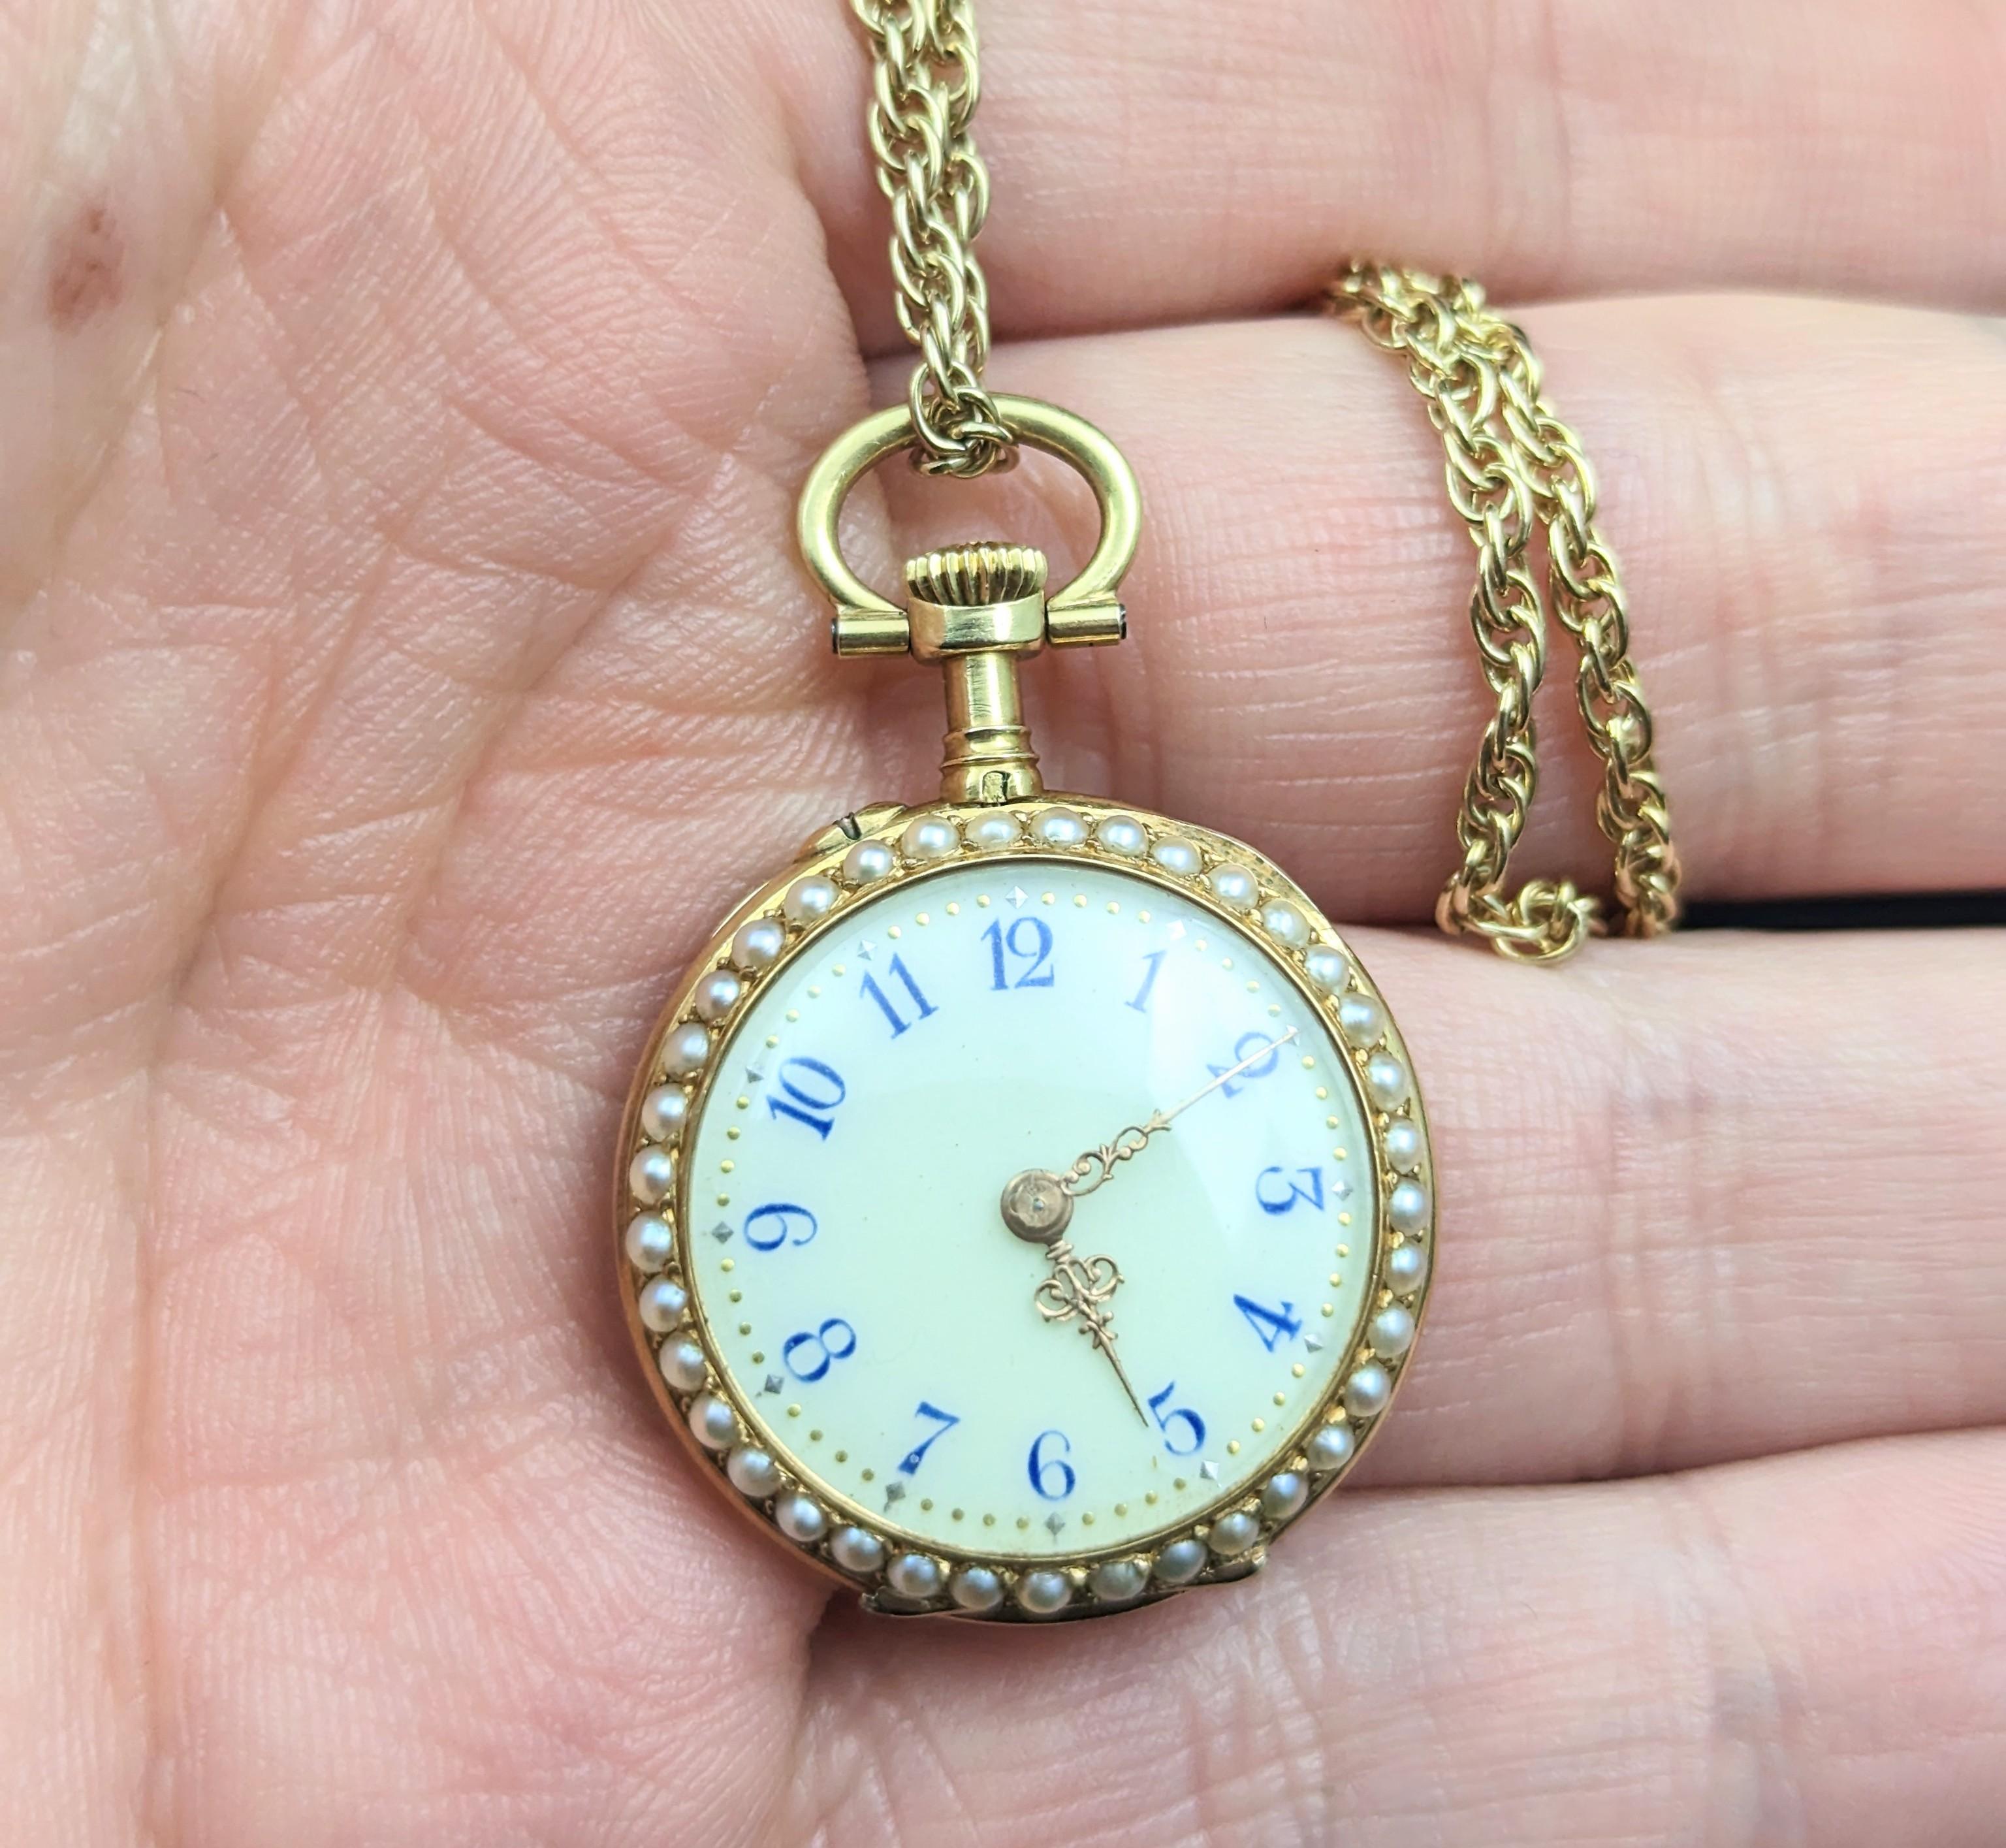 Antique Diamond and Pearl Fob Watch, 18 Karat Gold, Guilloche Enamel 2